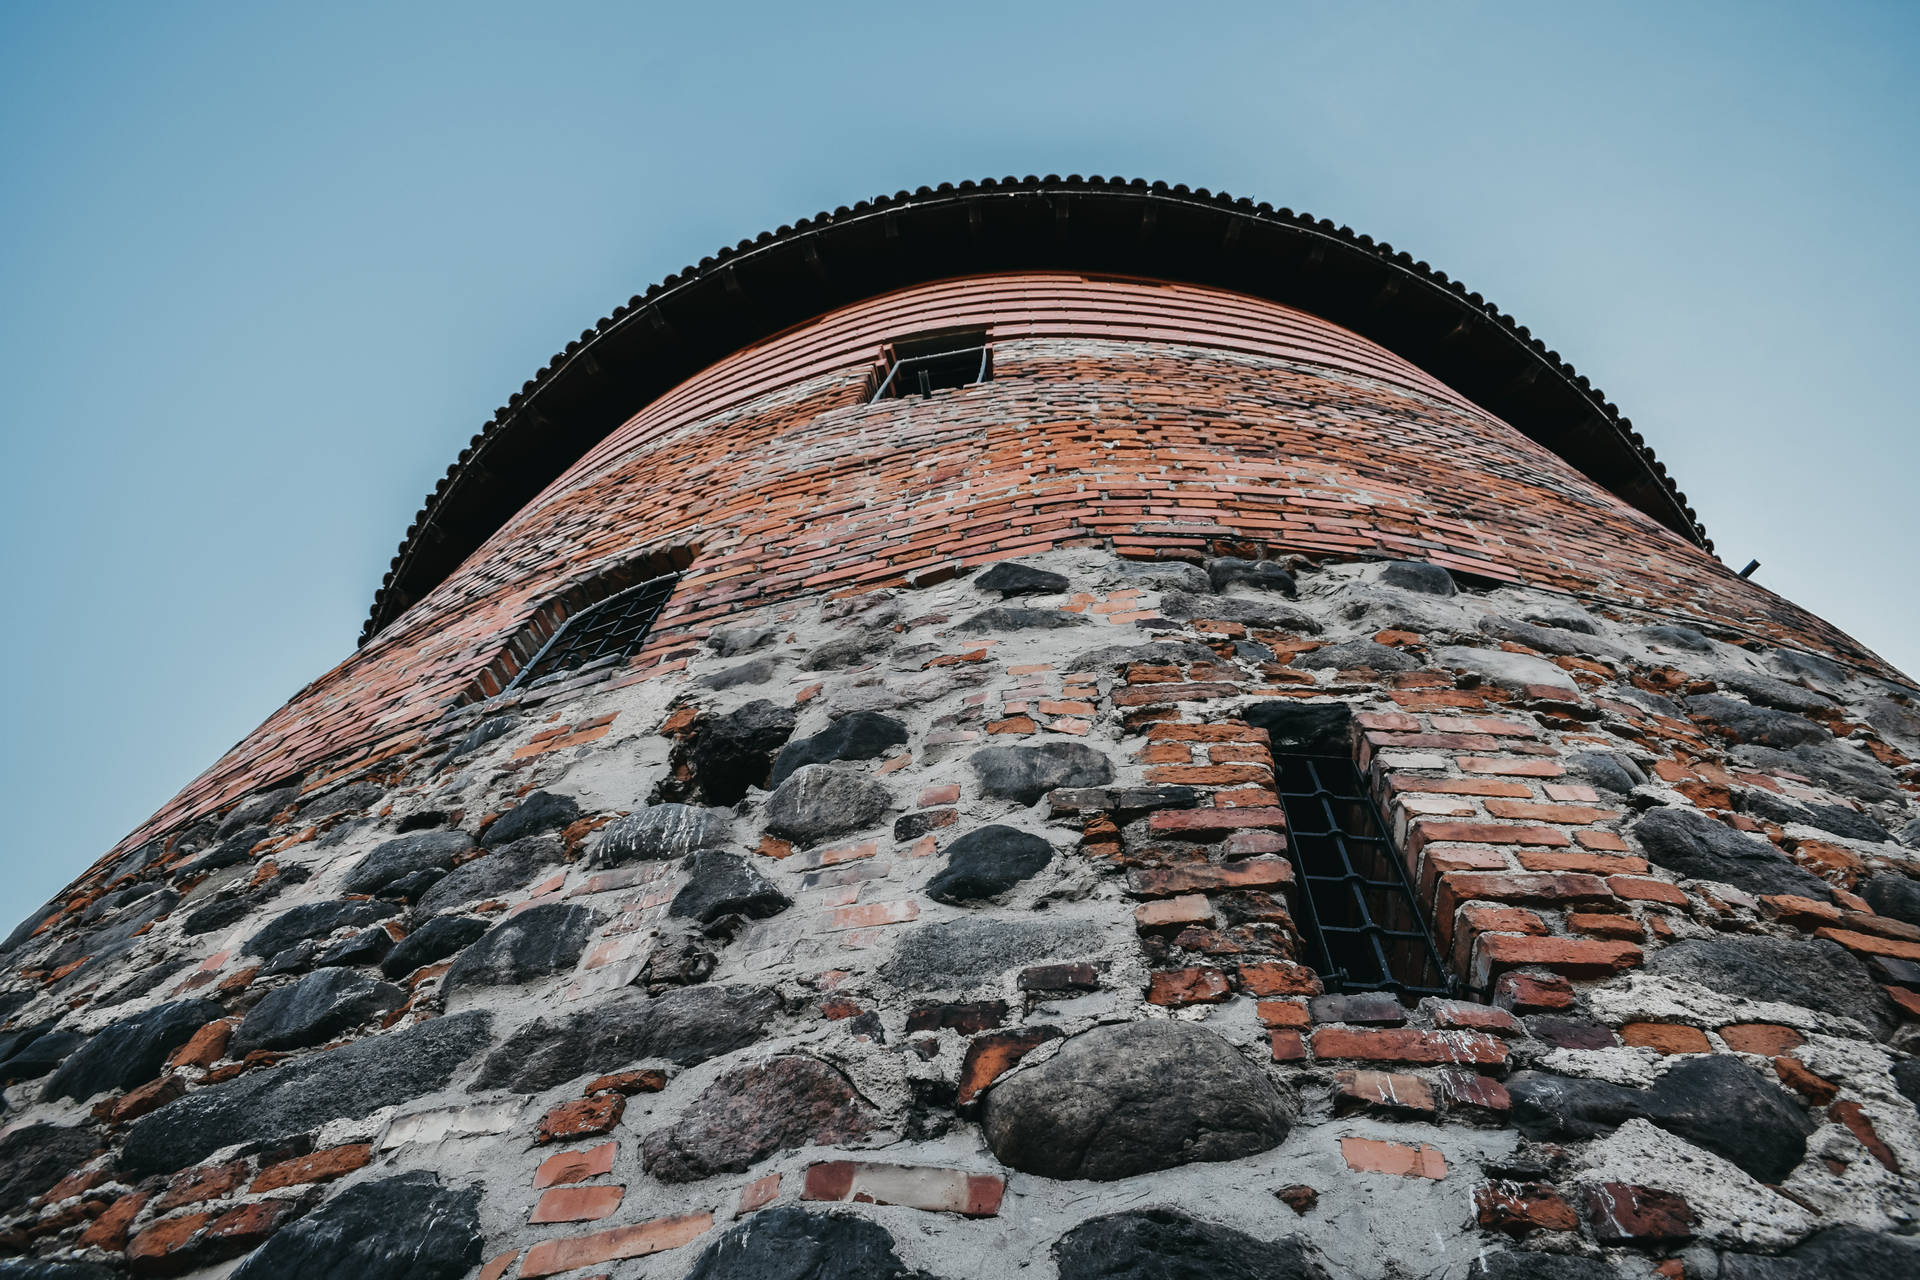 View Of Brick Tower In Lithuania